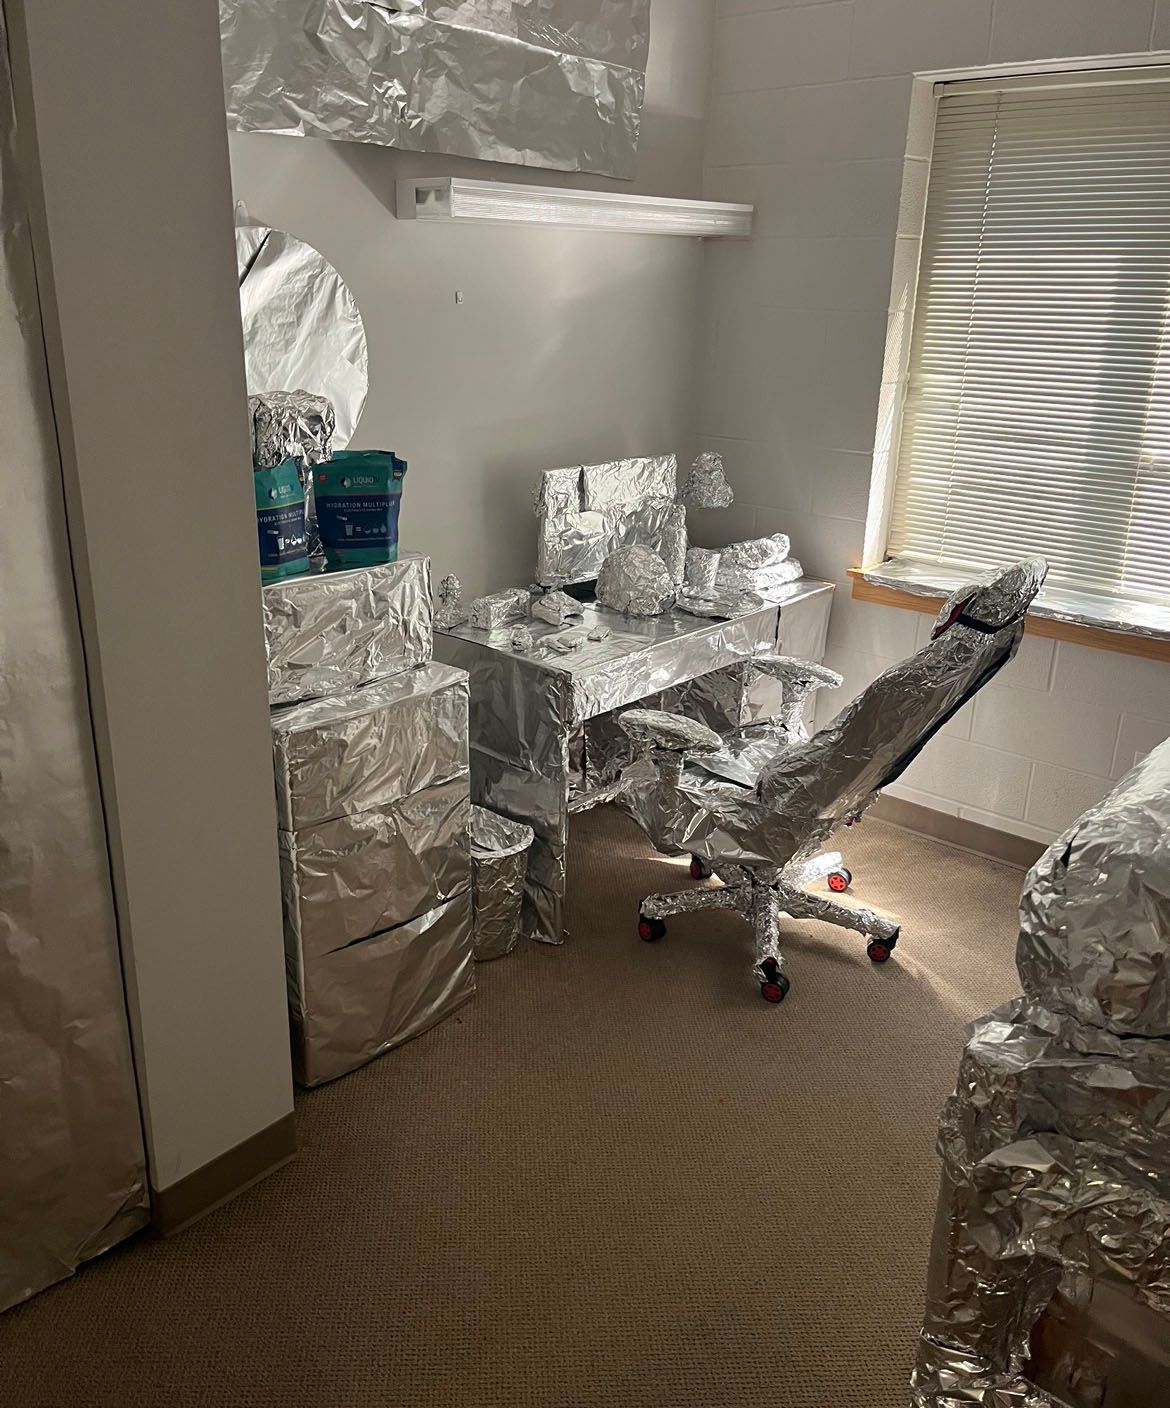 One student's plans to rest after Labor Day were foiled